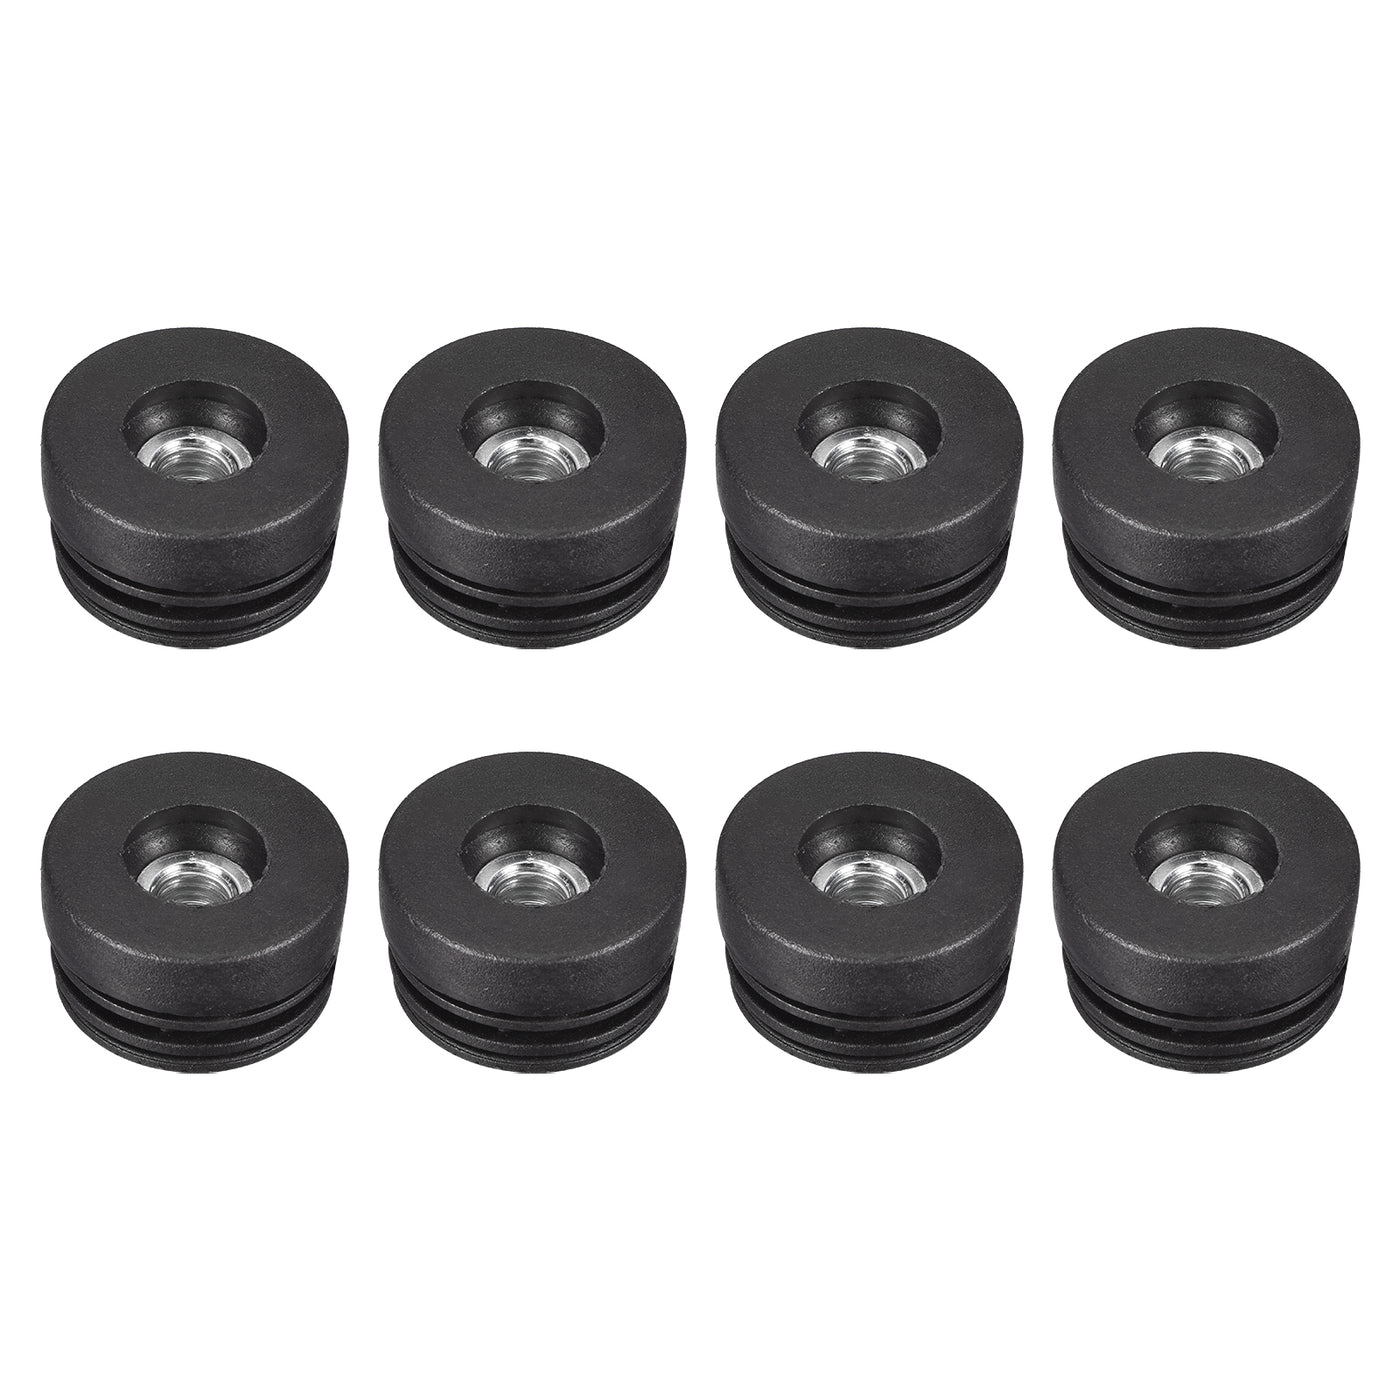 uxcell Uxcell 8Pcs 38mm/1.5" Caster Insert with Thread, Round M10 Thread for Furniture